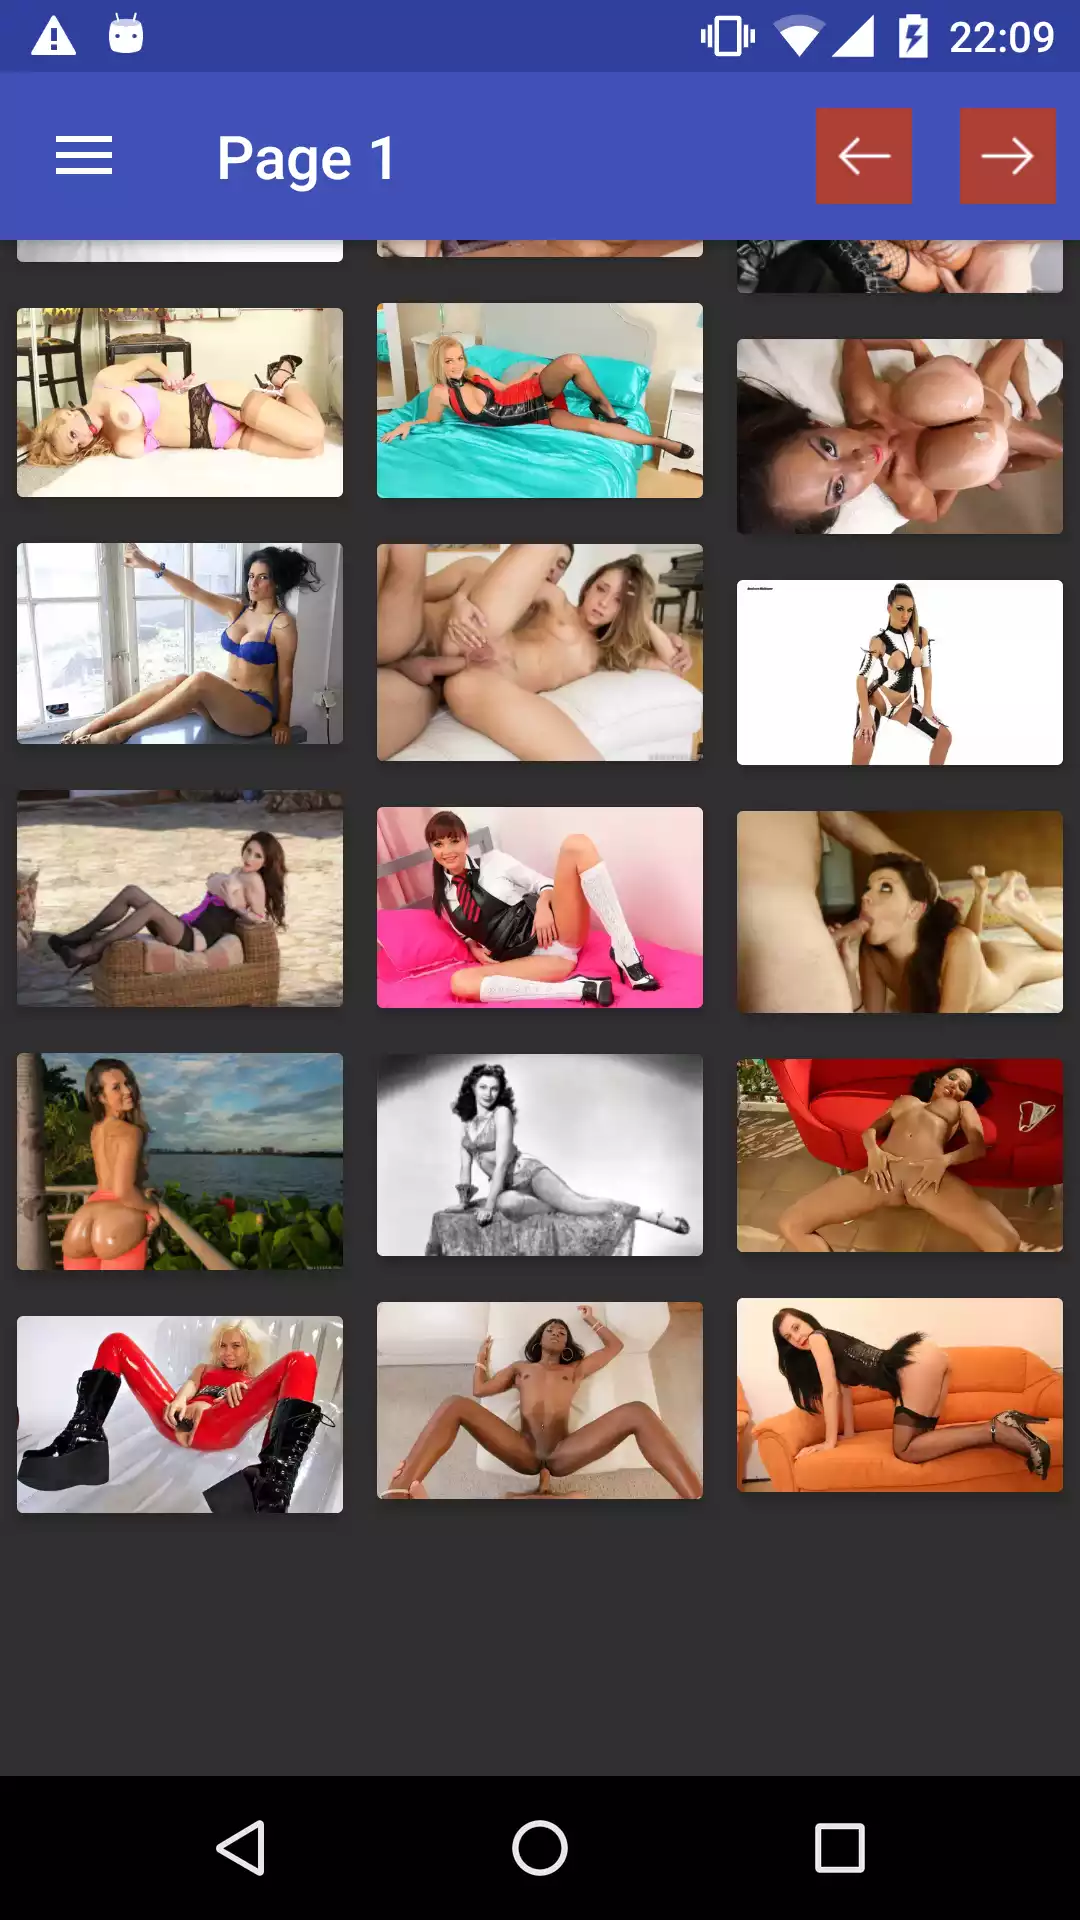 Pornstar Wallpapers 2 sexgalleries,best,henati,download,adult,apk,hot,hentai,pictures,galleries,porn,wallpapers,apps,pics,ecchi,image,photos,star,aplikasi,for,anime,android,sexy